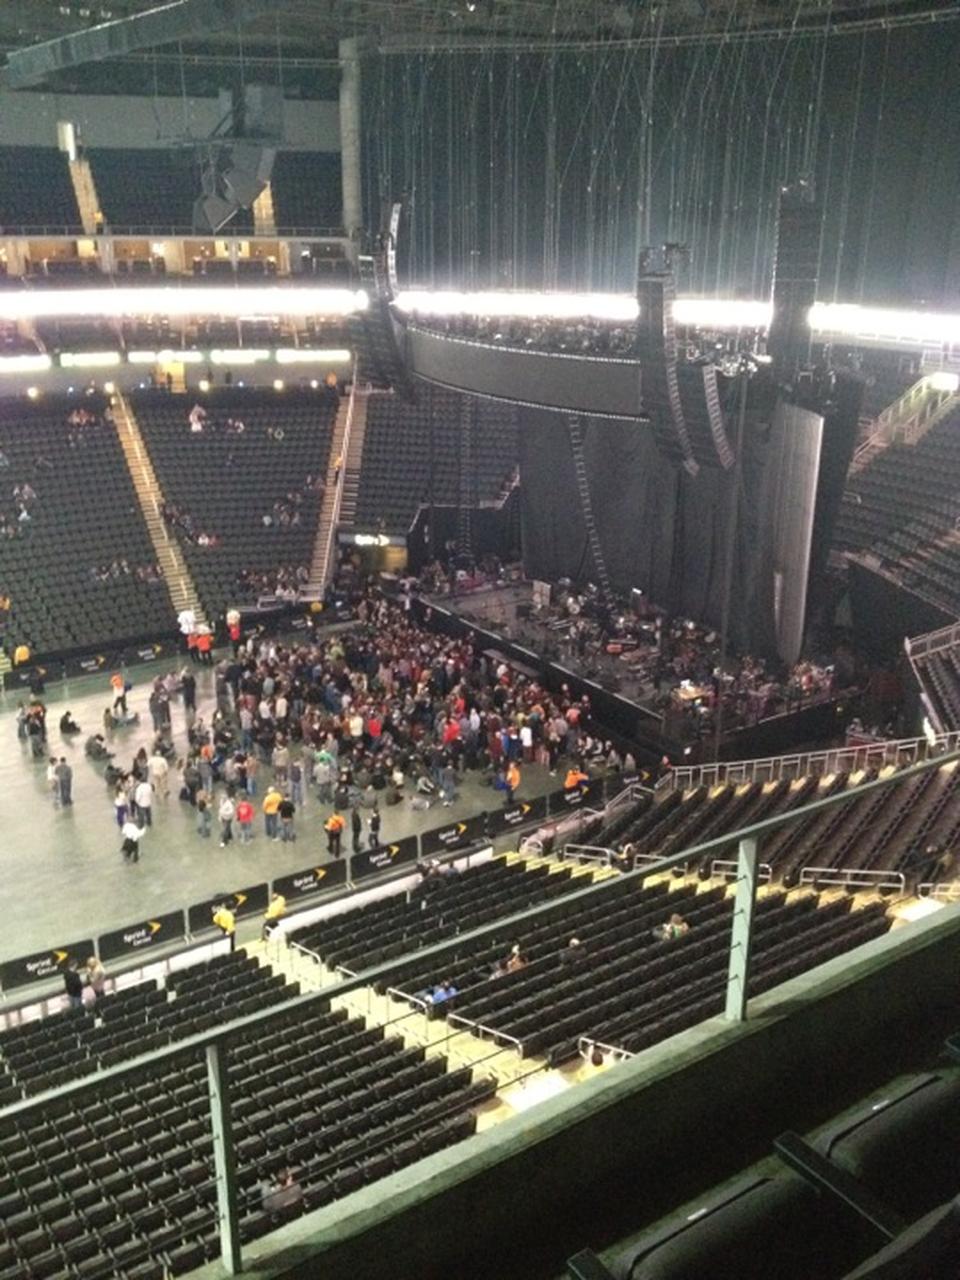 section 225, row 2 seat view  for concert - t-mobile center